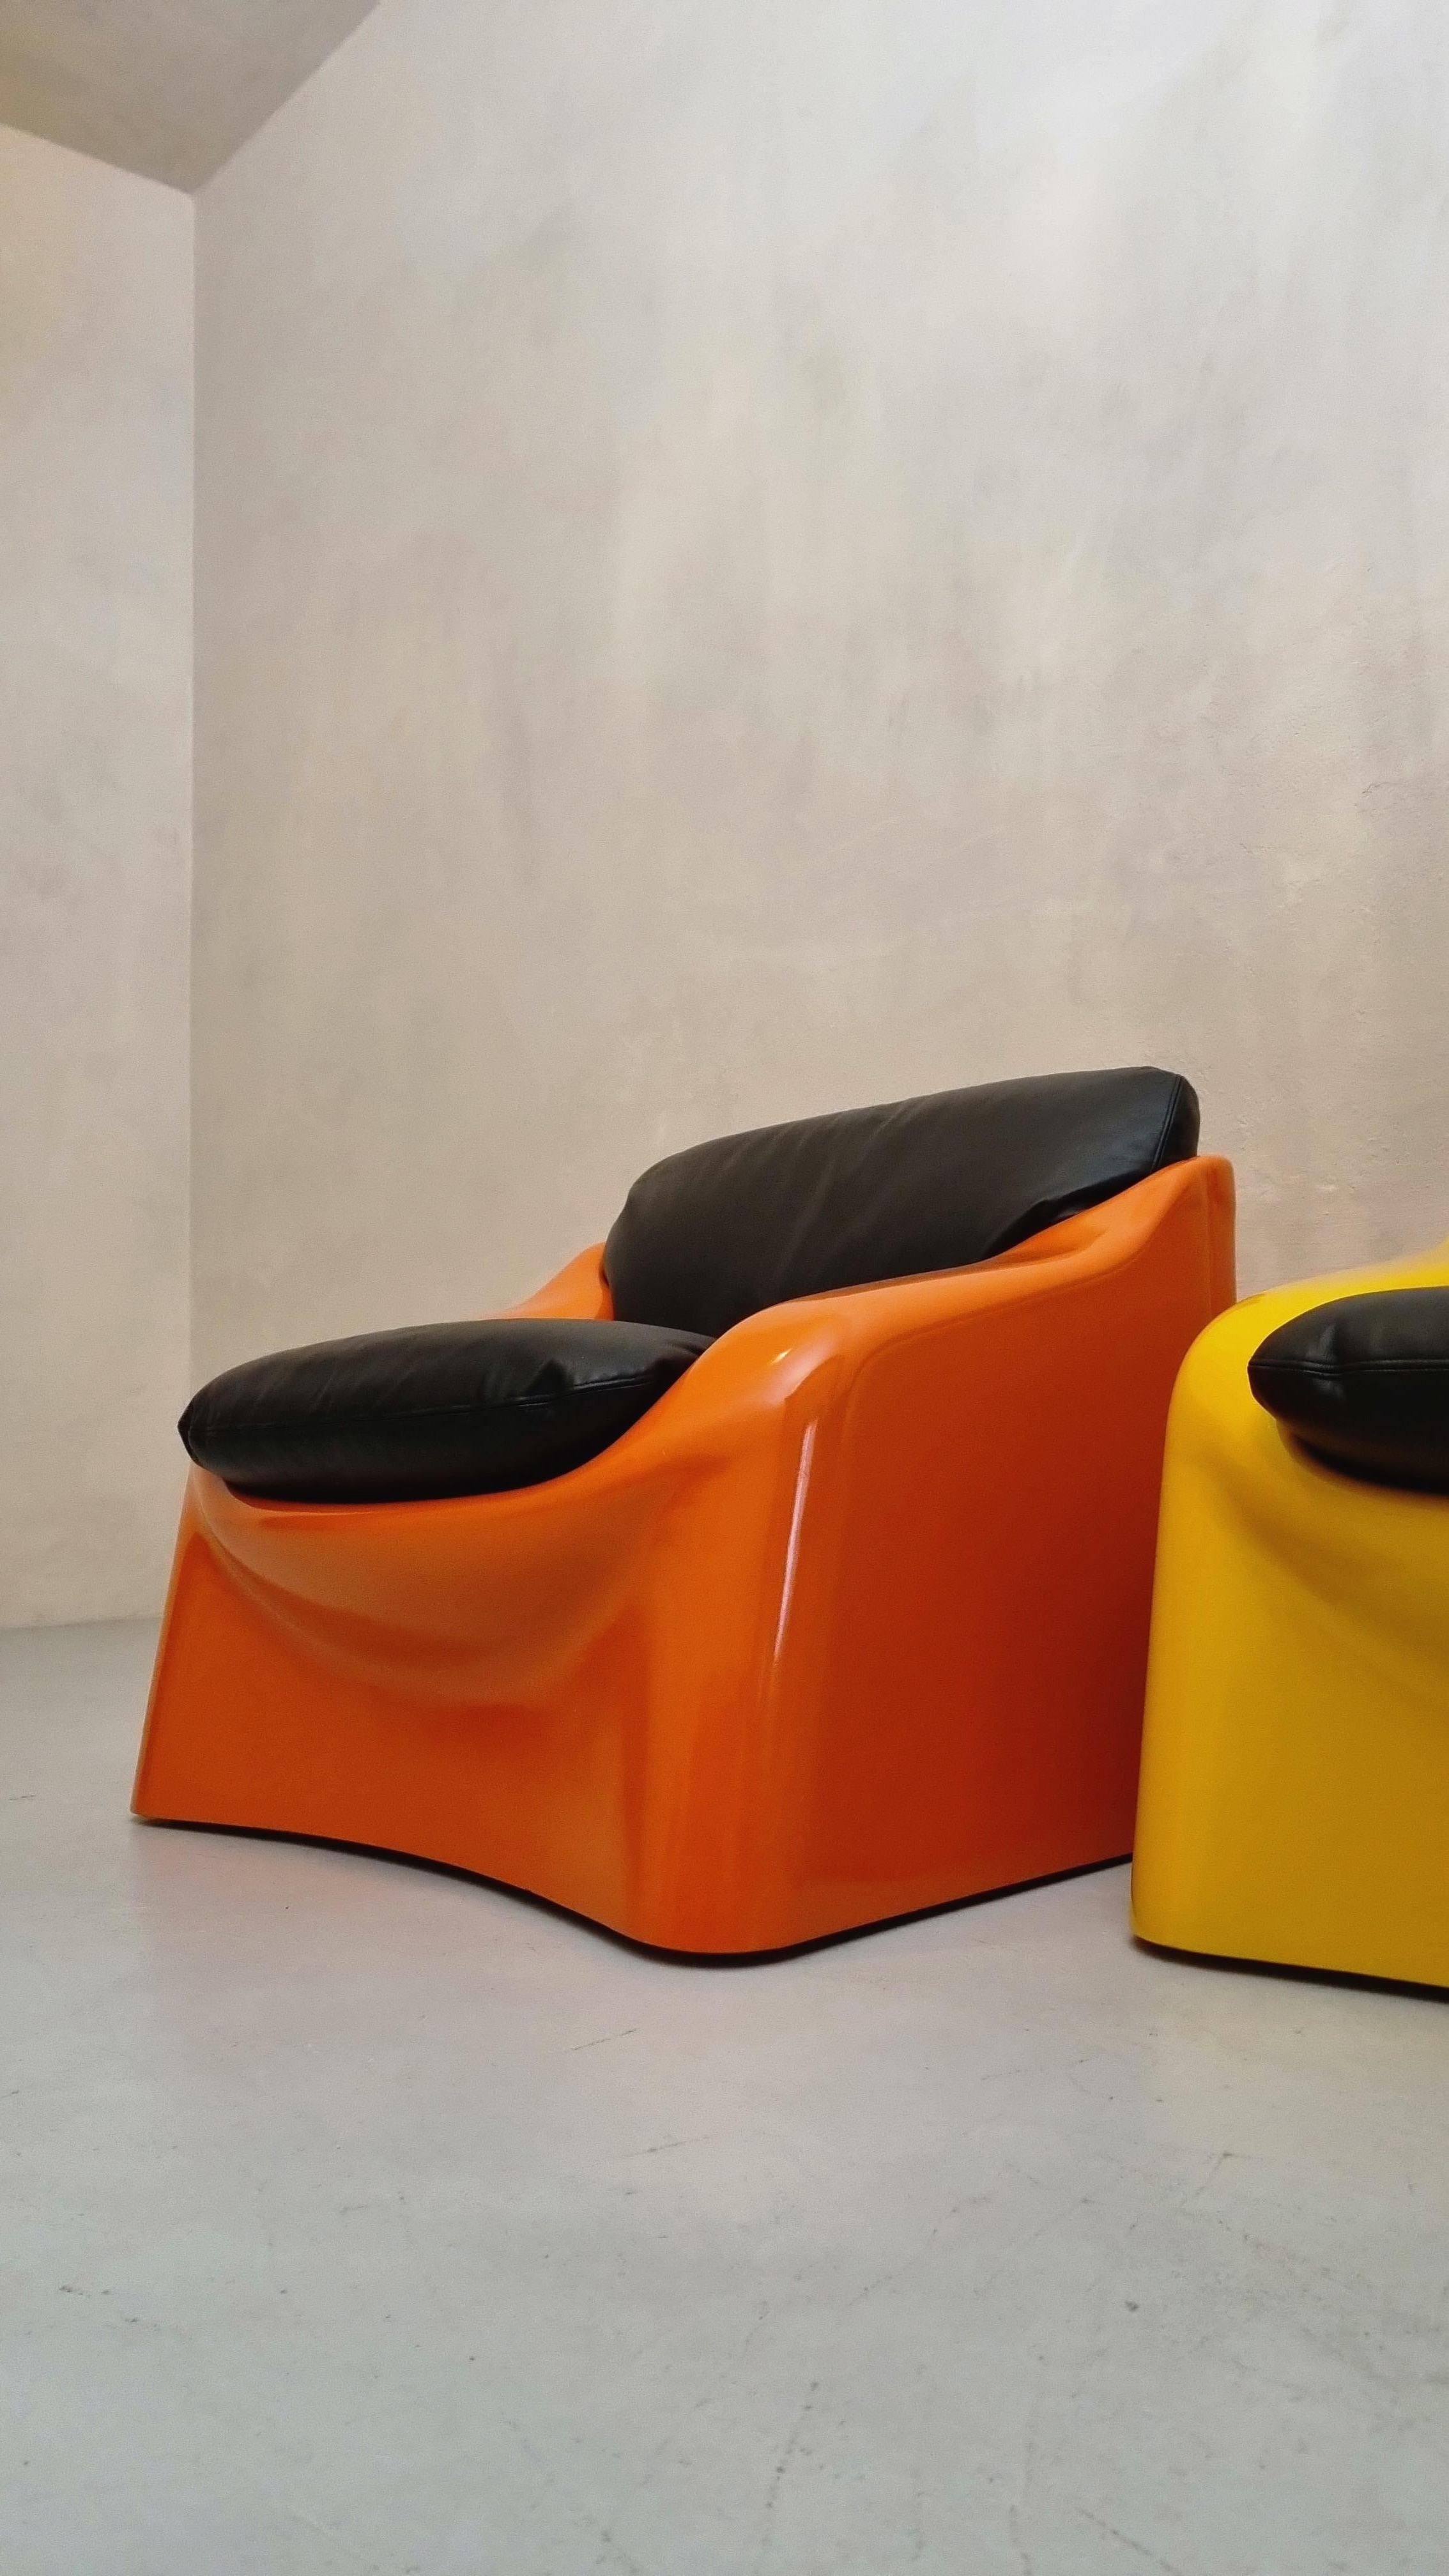 Two armchairs mod. Galassia designed by Ferdinando Buzzi for Ferruccio Brunati , 70s.
Structure in shockproof polystyrene and plastic coatings, seats in cowhide leather.
A valid testimony of the first trials, shockproof plastic in the field of